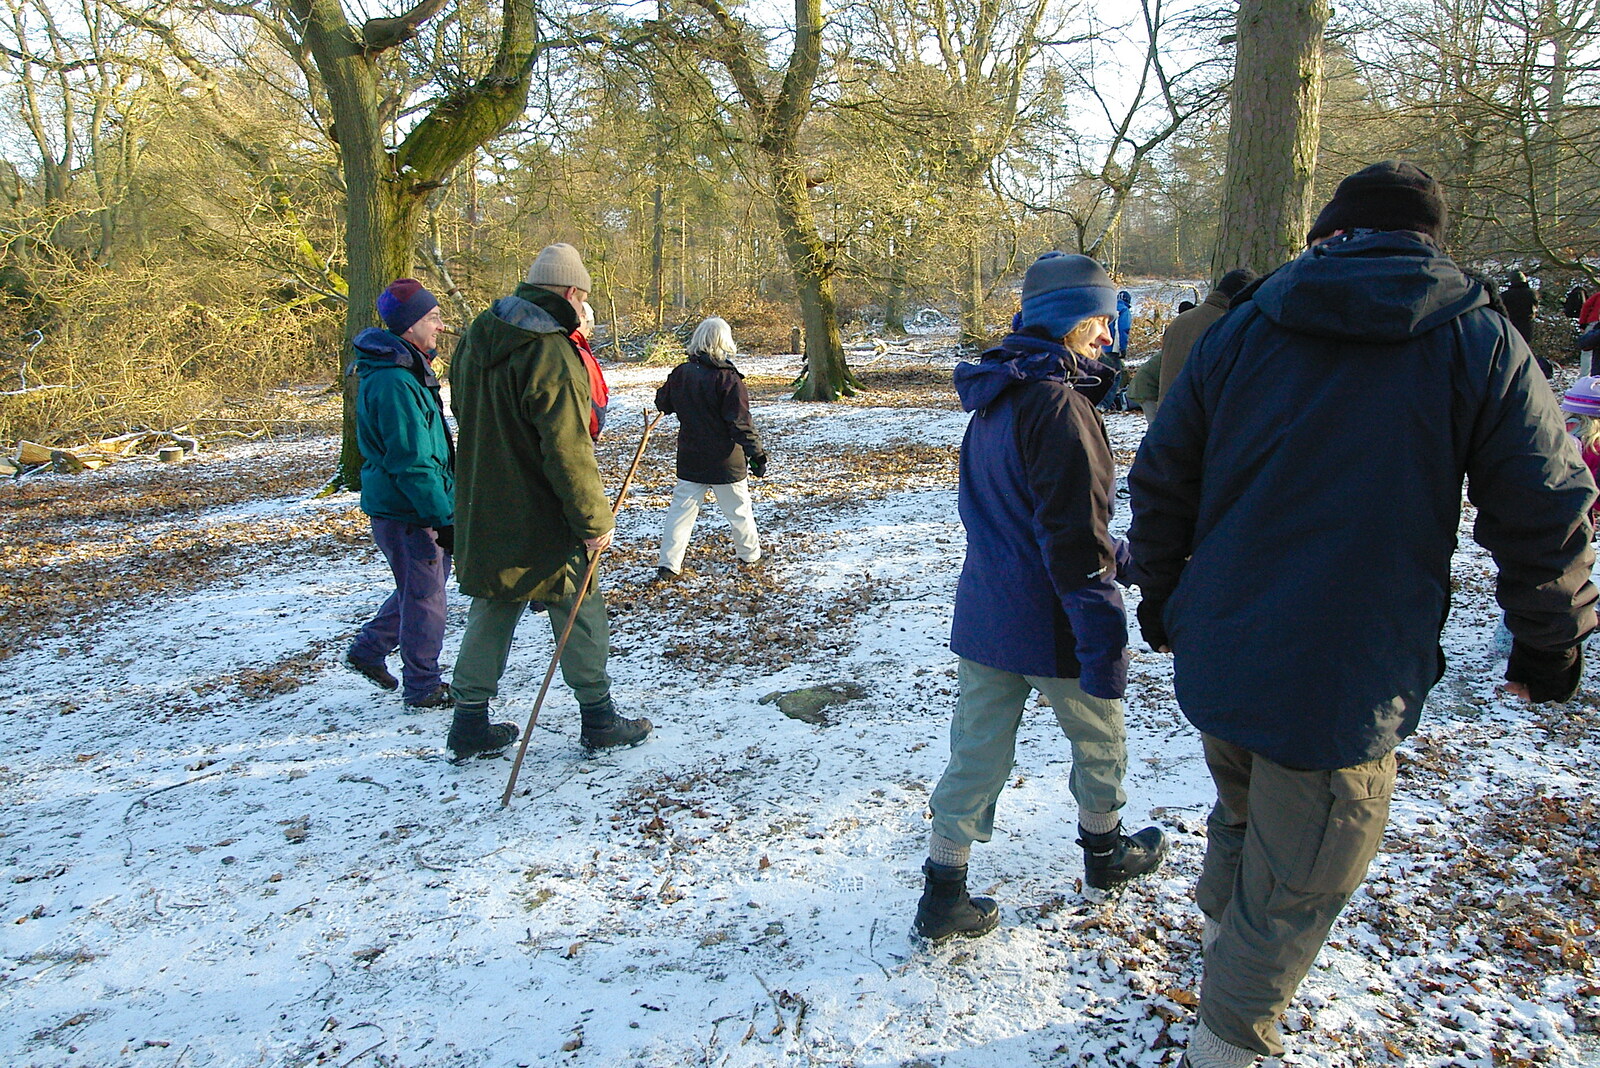 The group hikes off into the forest from Walk Like a Shadow: A Day With Ray Mears, Ashdown Forest, East Sussex - 29th December 2005